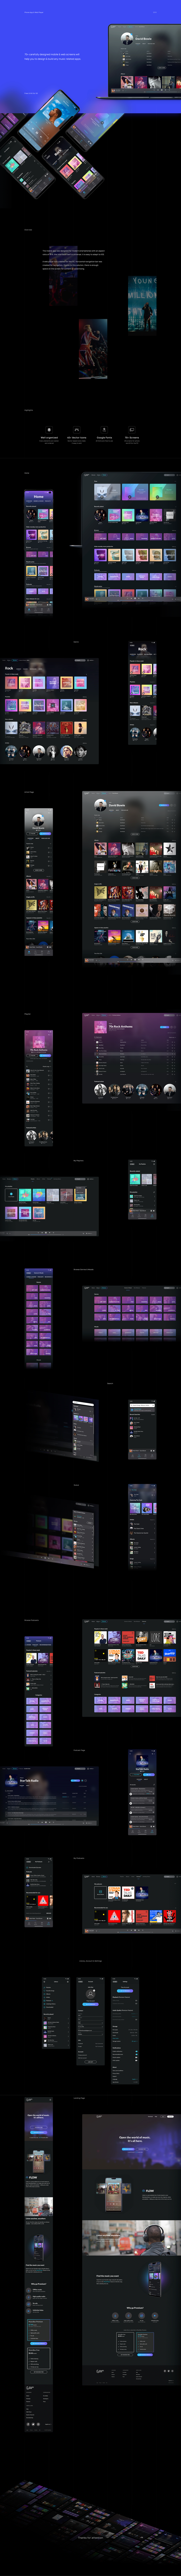 MusicBox Free UI Kit for Adobe XD - Elegant and clean music app design. 70+ screens will help you to design & build any music related apps.